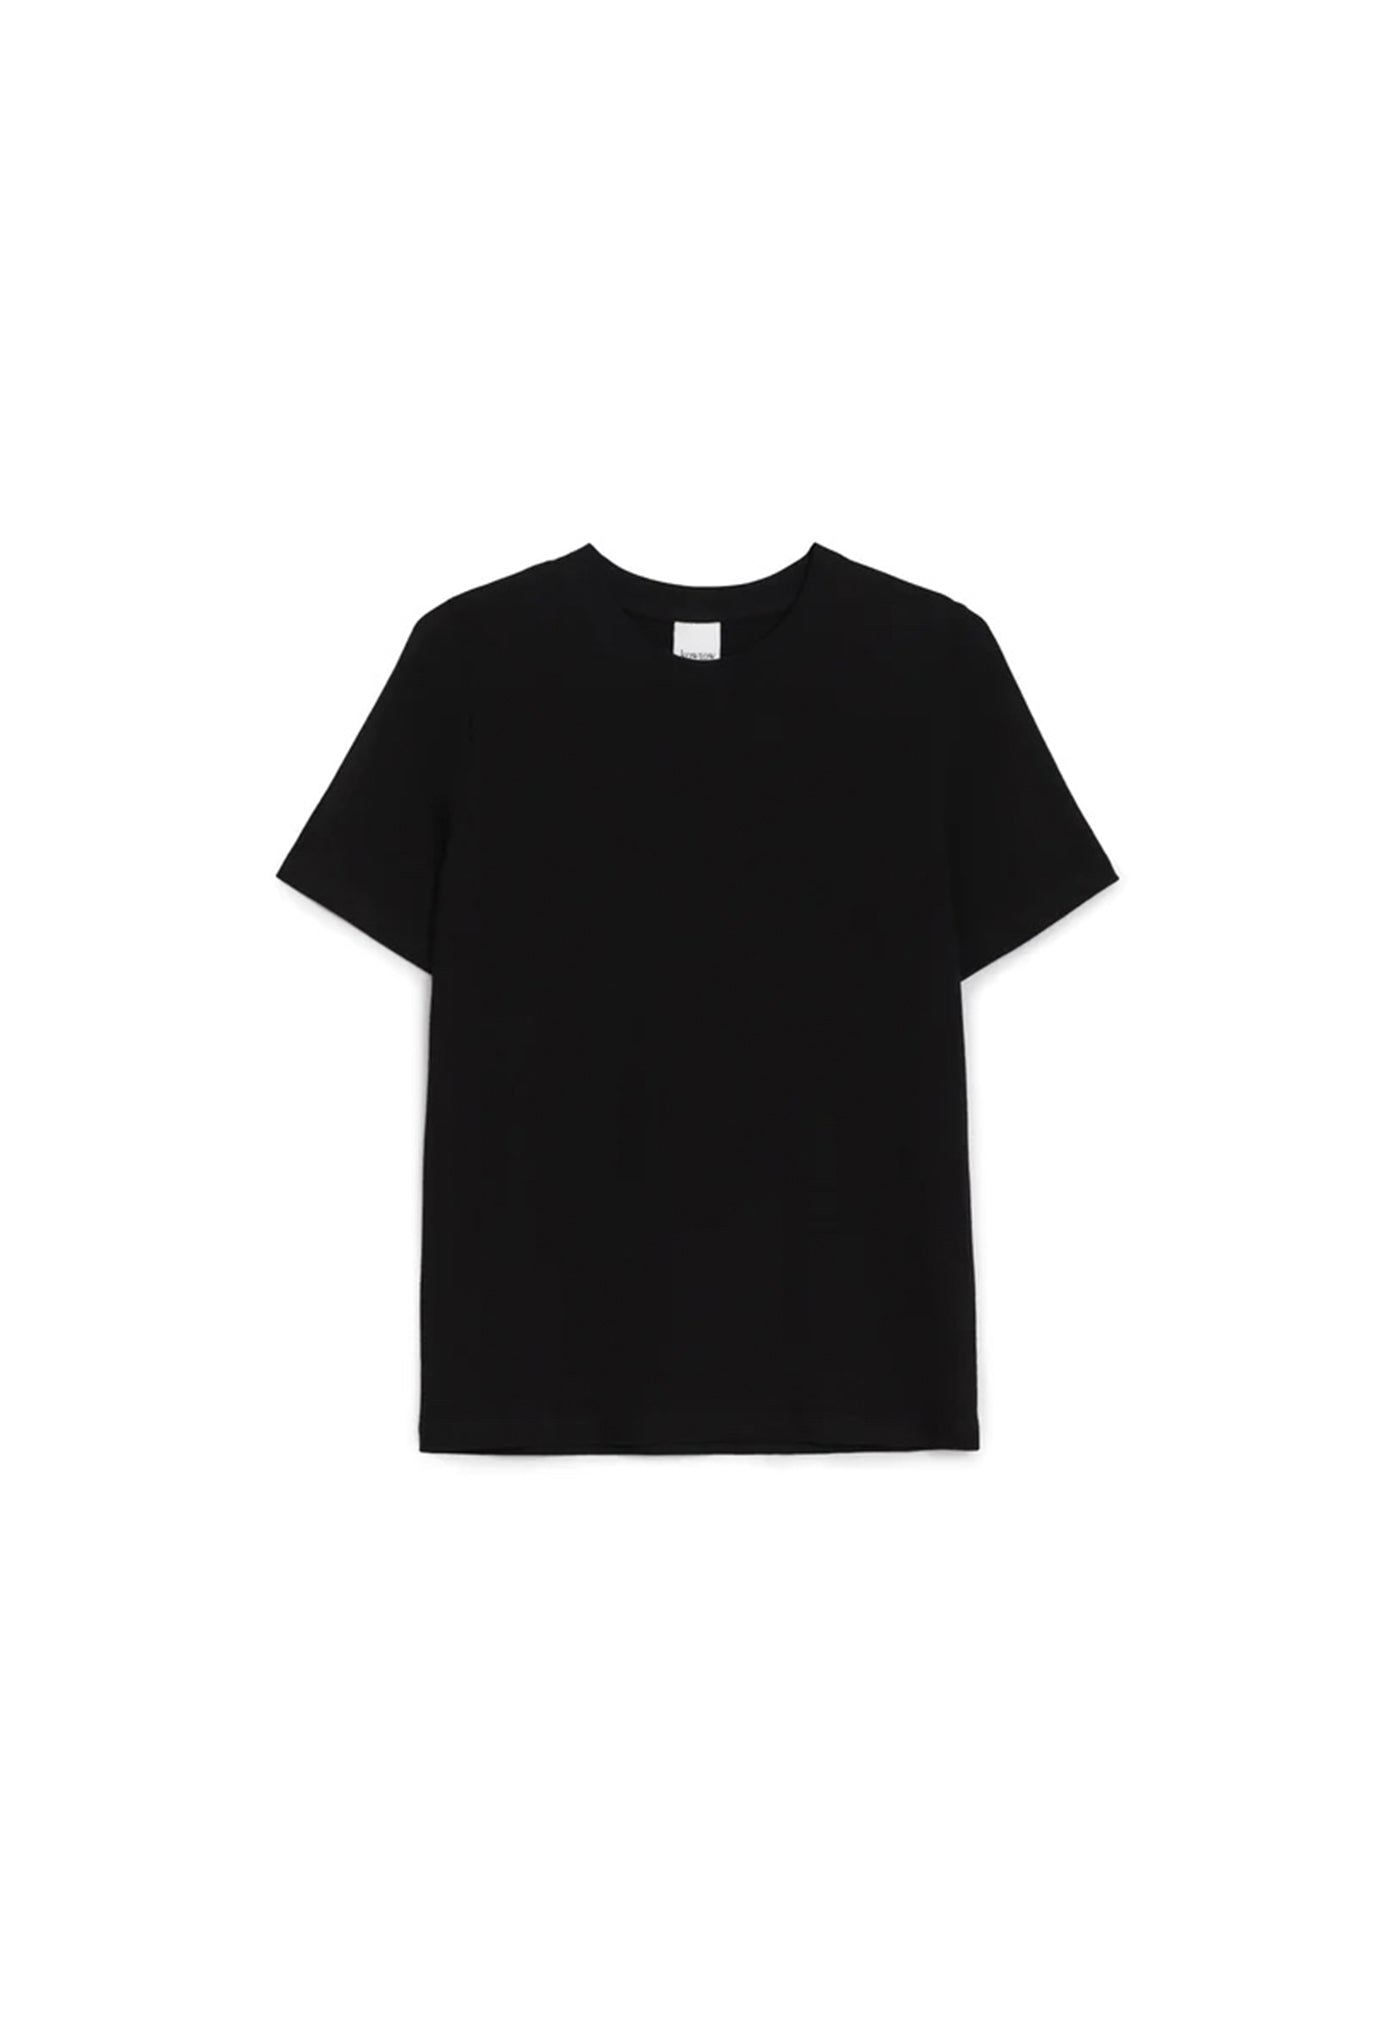 Classic Tee - Black sold by Angel Divine